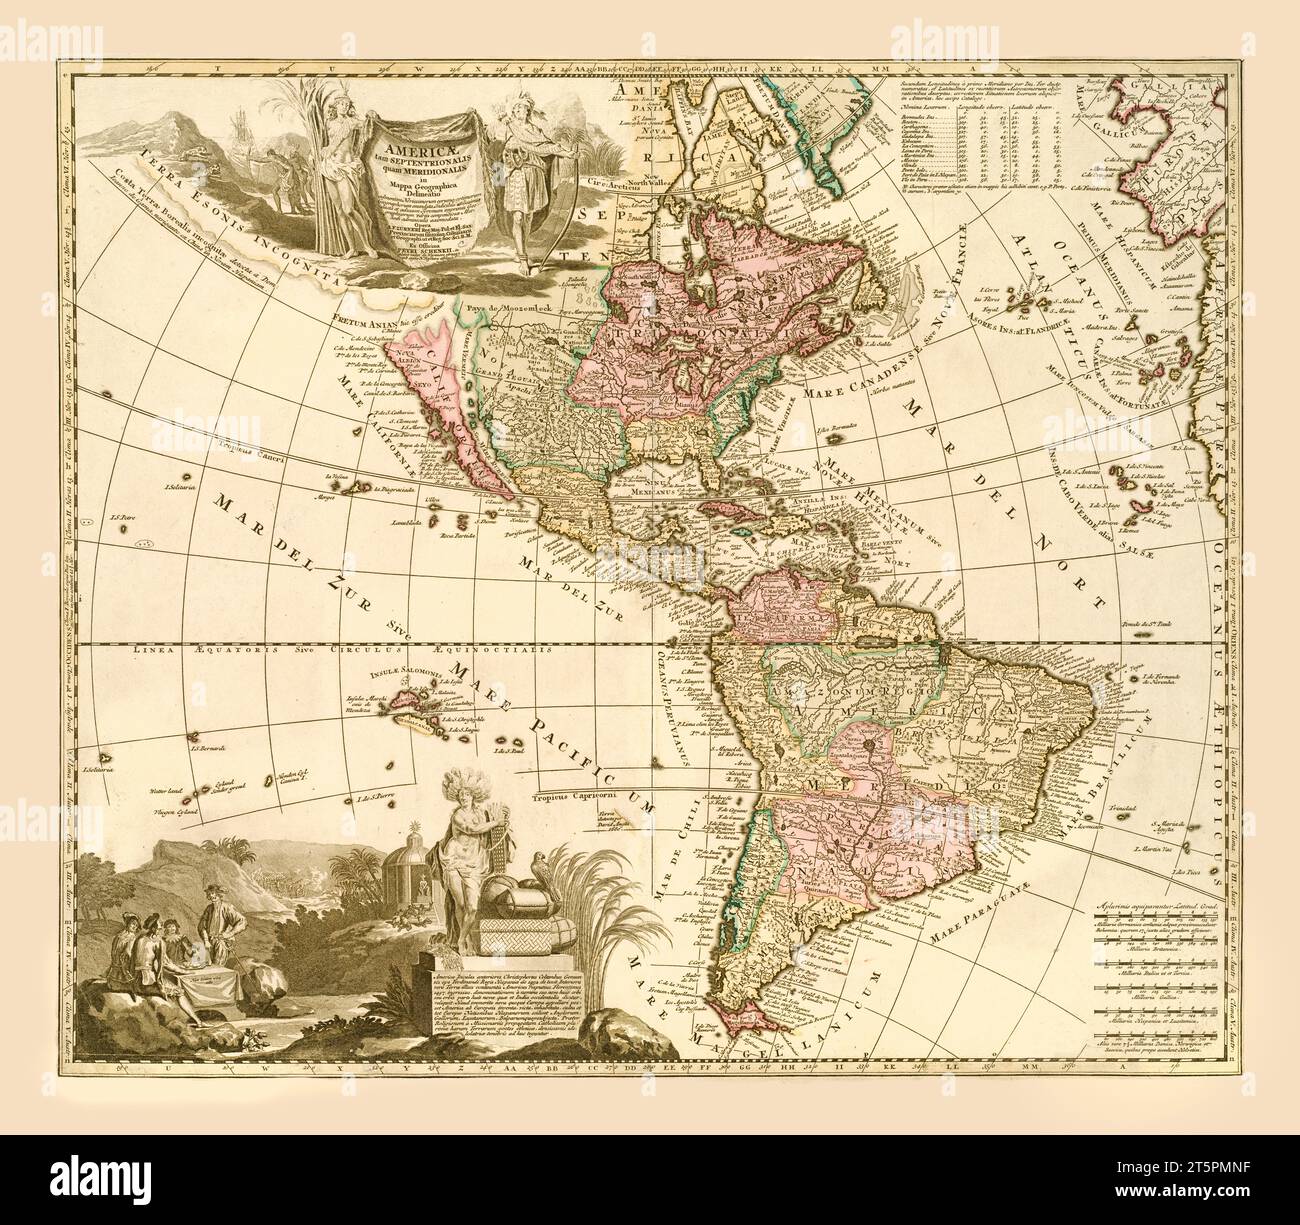 Old map of America. By Zuerner, publ. ca. 1700 Stock Photo